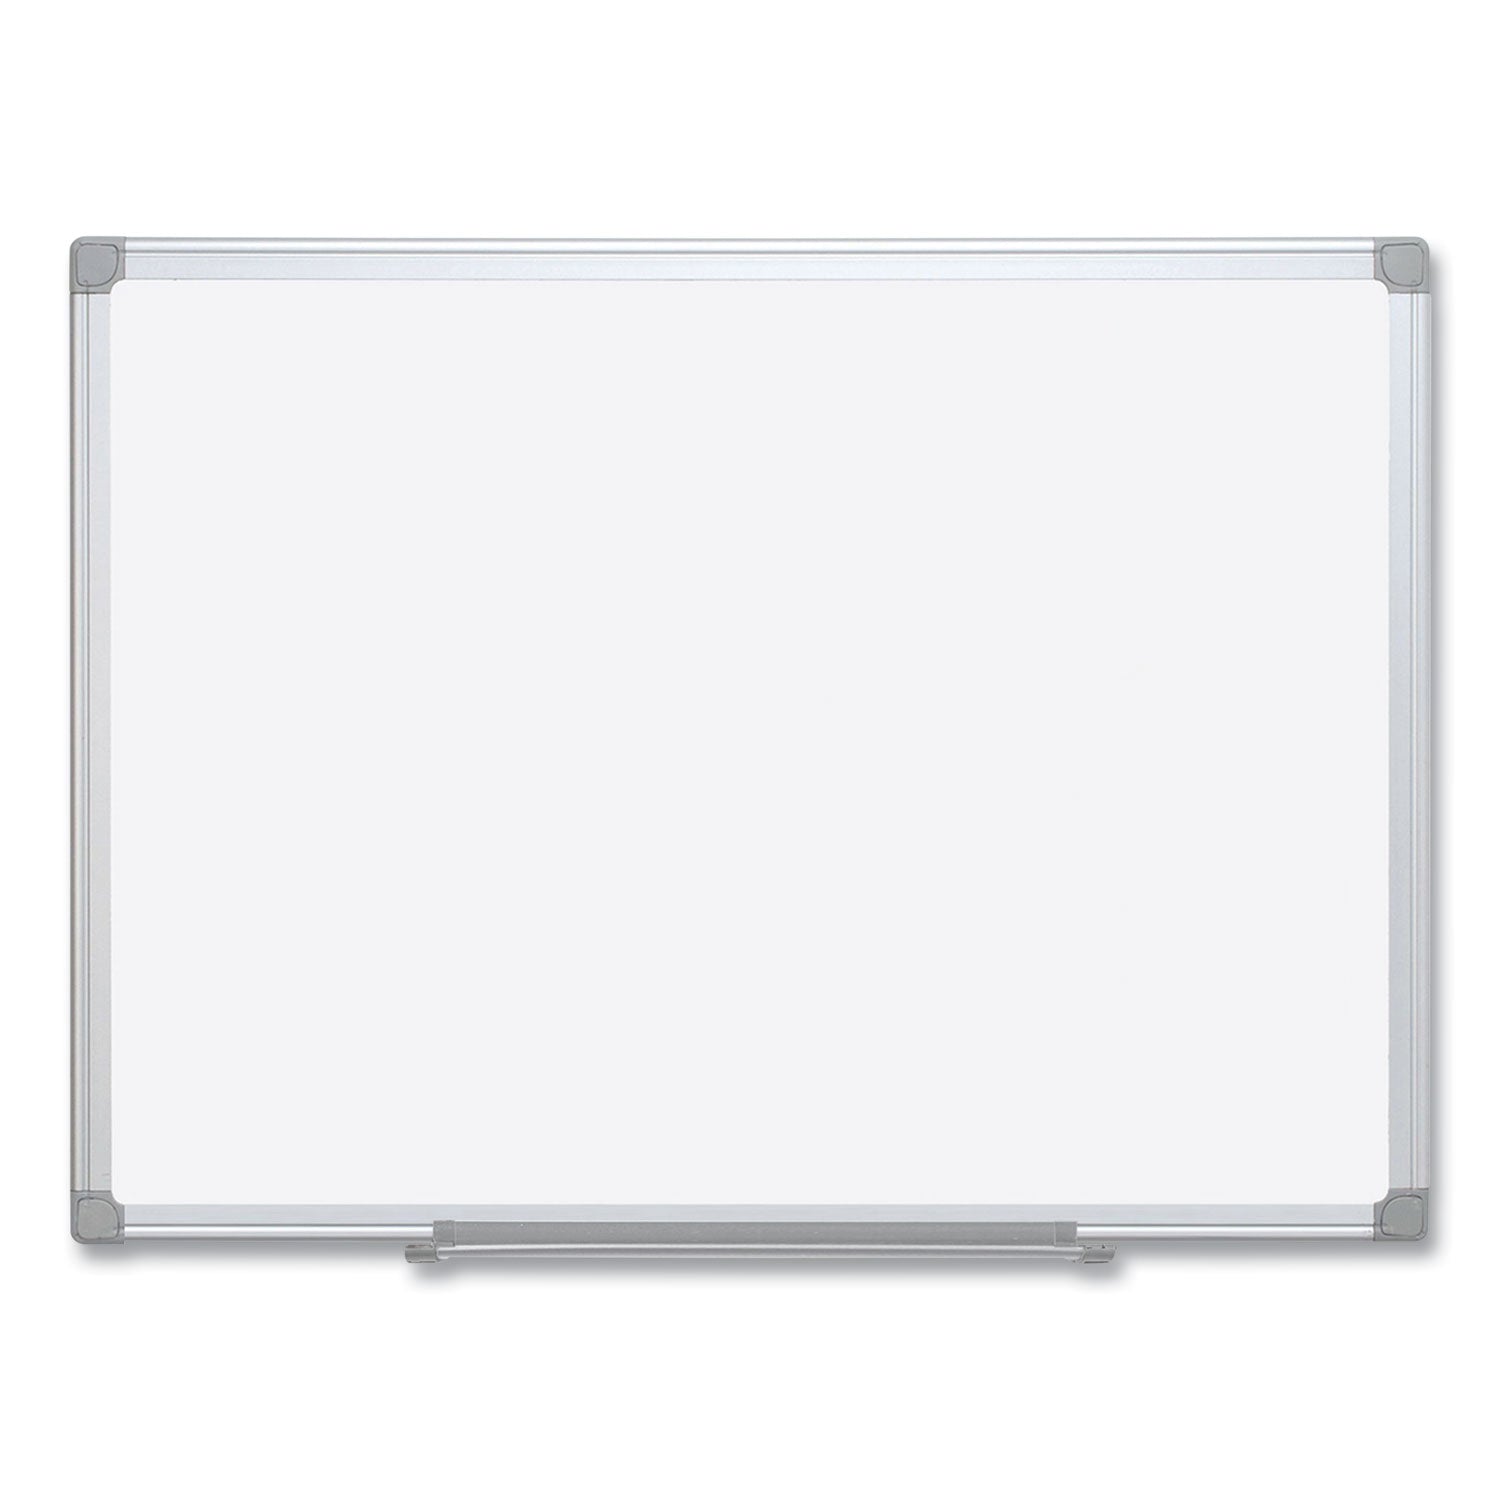 earth-silver-easy-clean-dry-erase-boards-96-x-48-white-surface-silver-aluminum-frame_bvcma2100790 - 1